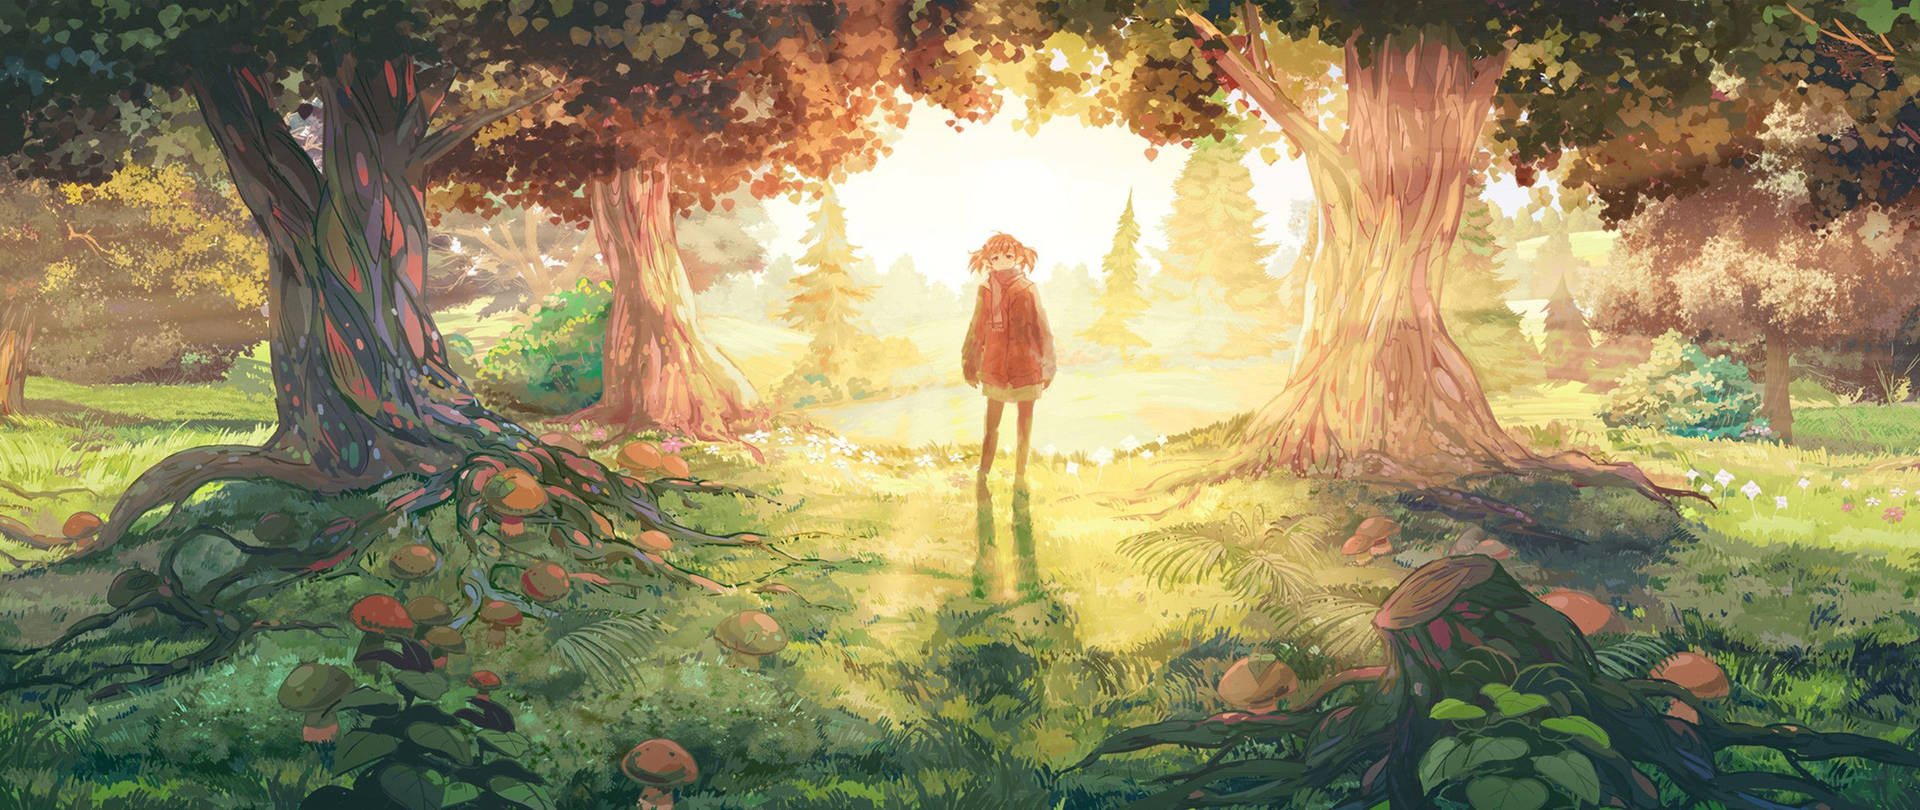 Anime girl enjoys the tranquility of the forest Wallpaper